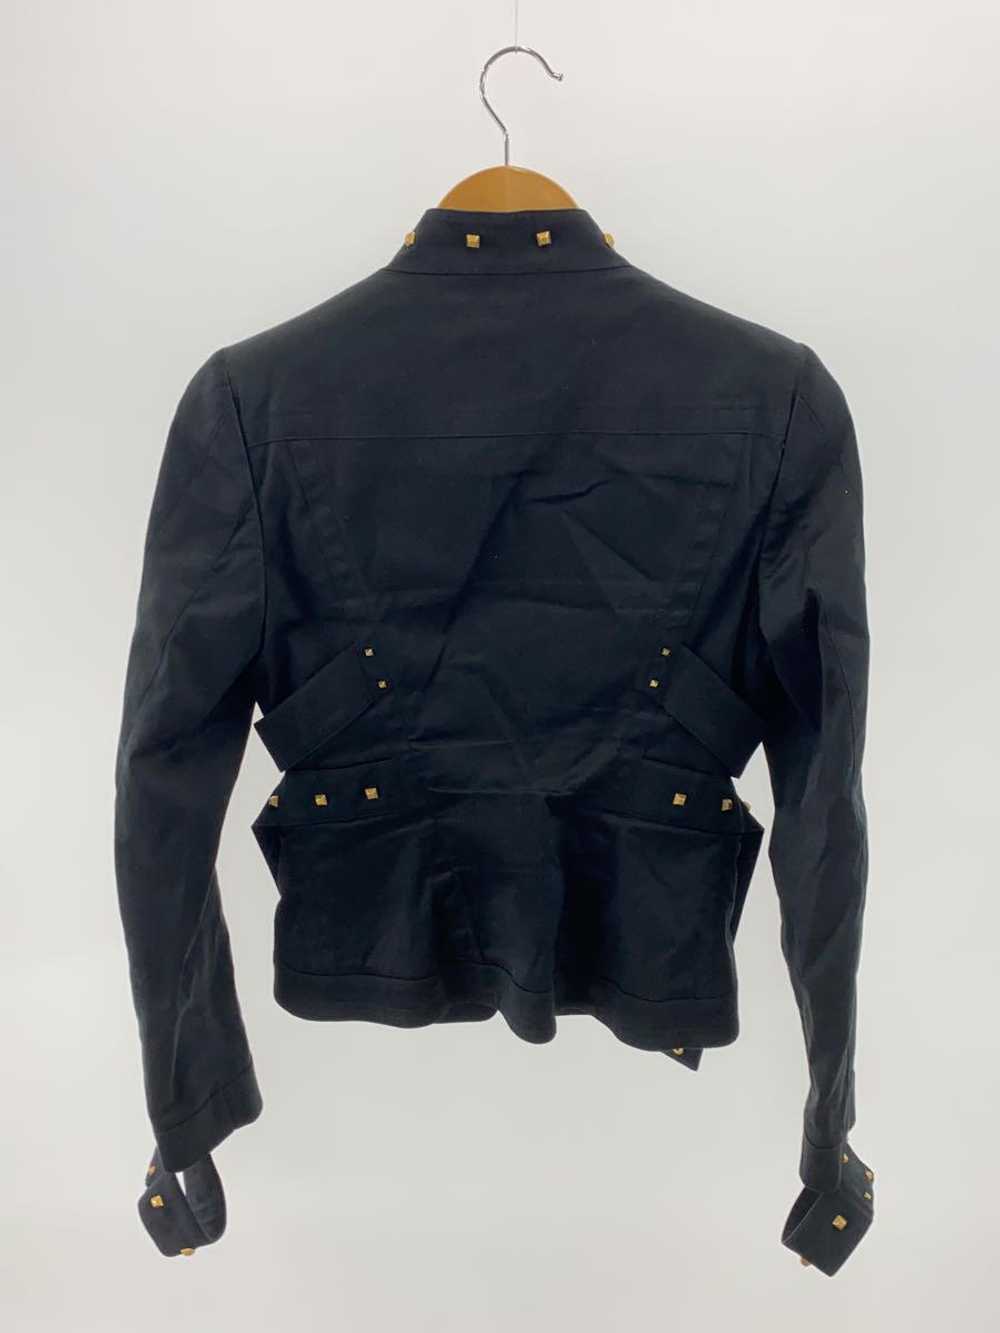 Gucci Belted Studs Jacket Tom Ford Period Stud De… - image 2